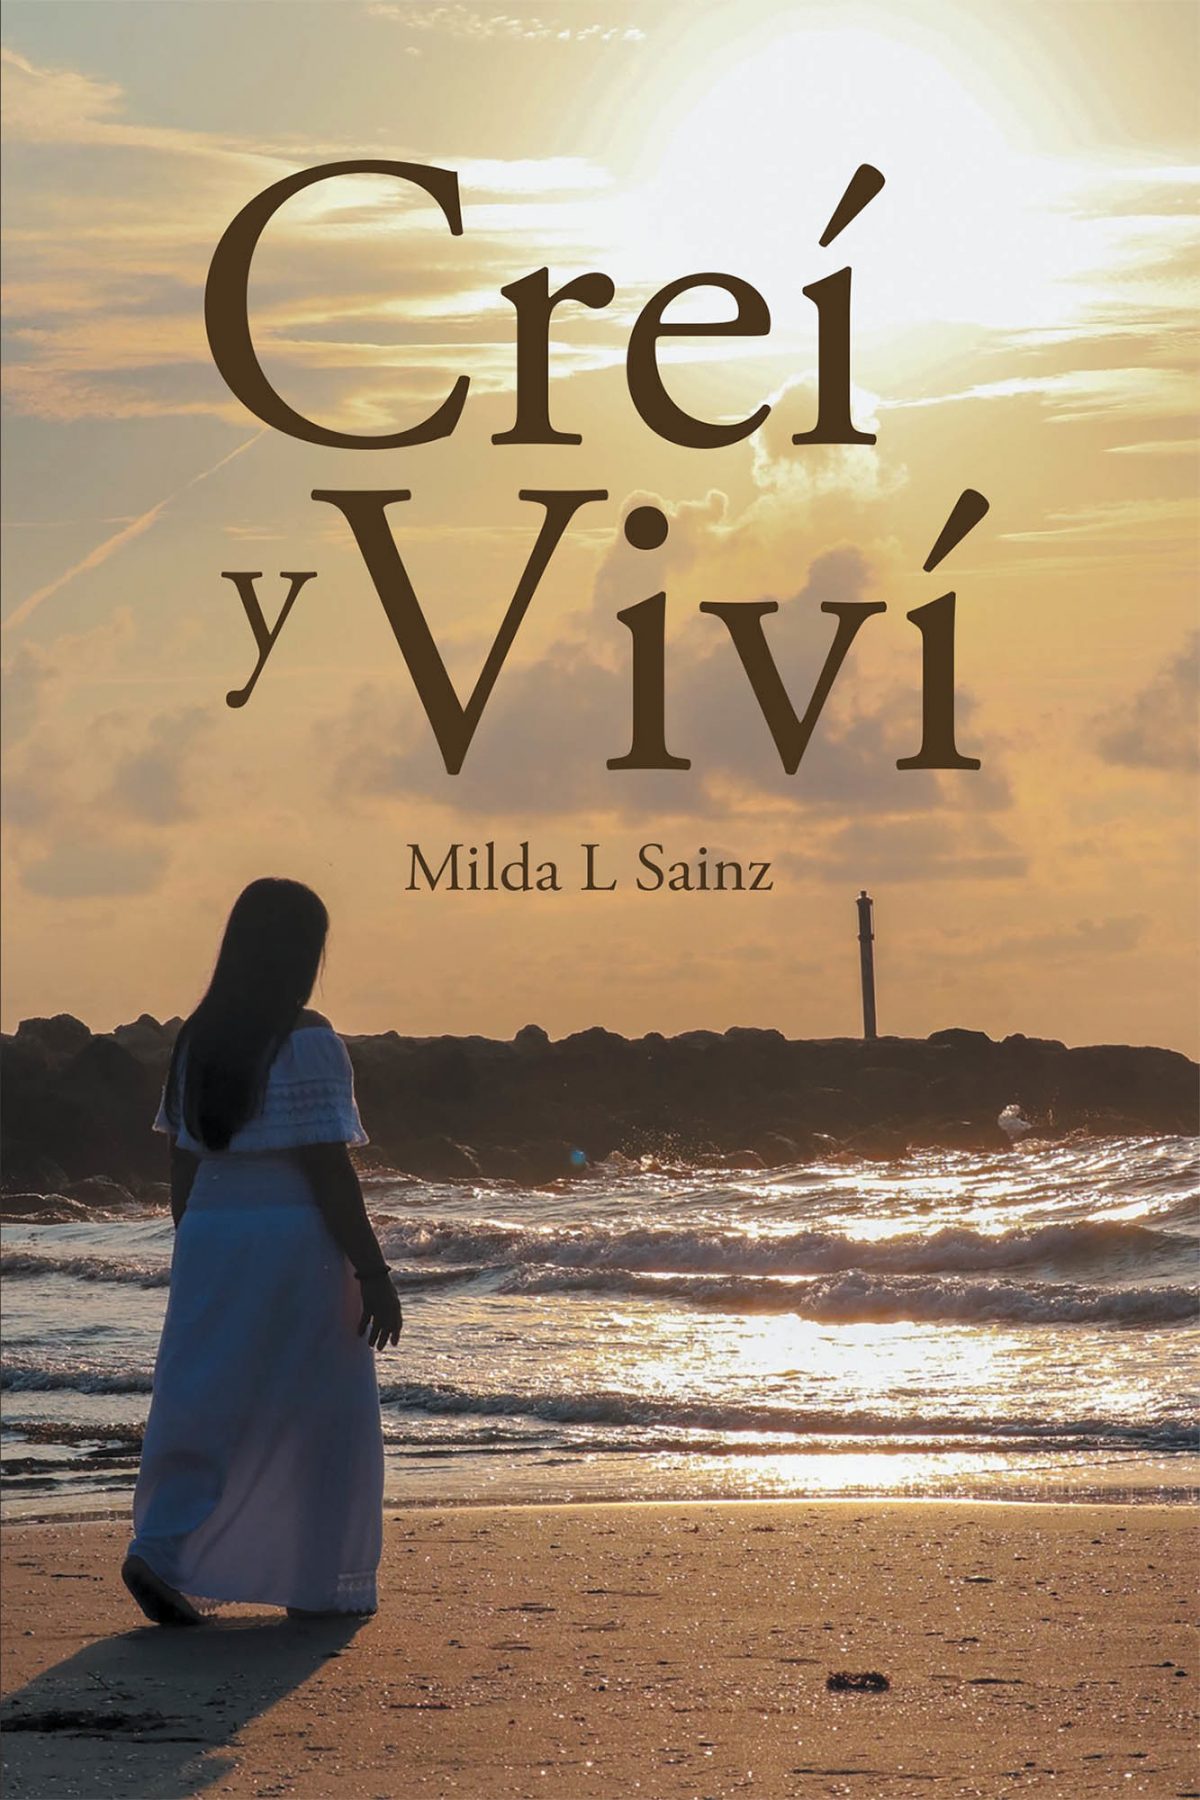 Milda L Sainz’s New Book Creí Y Viví, A Heartwarming Book That Encourages People Suffering From Cancer With God’s Grace And Deliverance